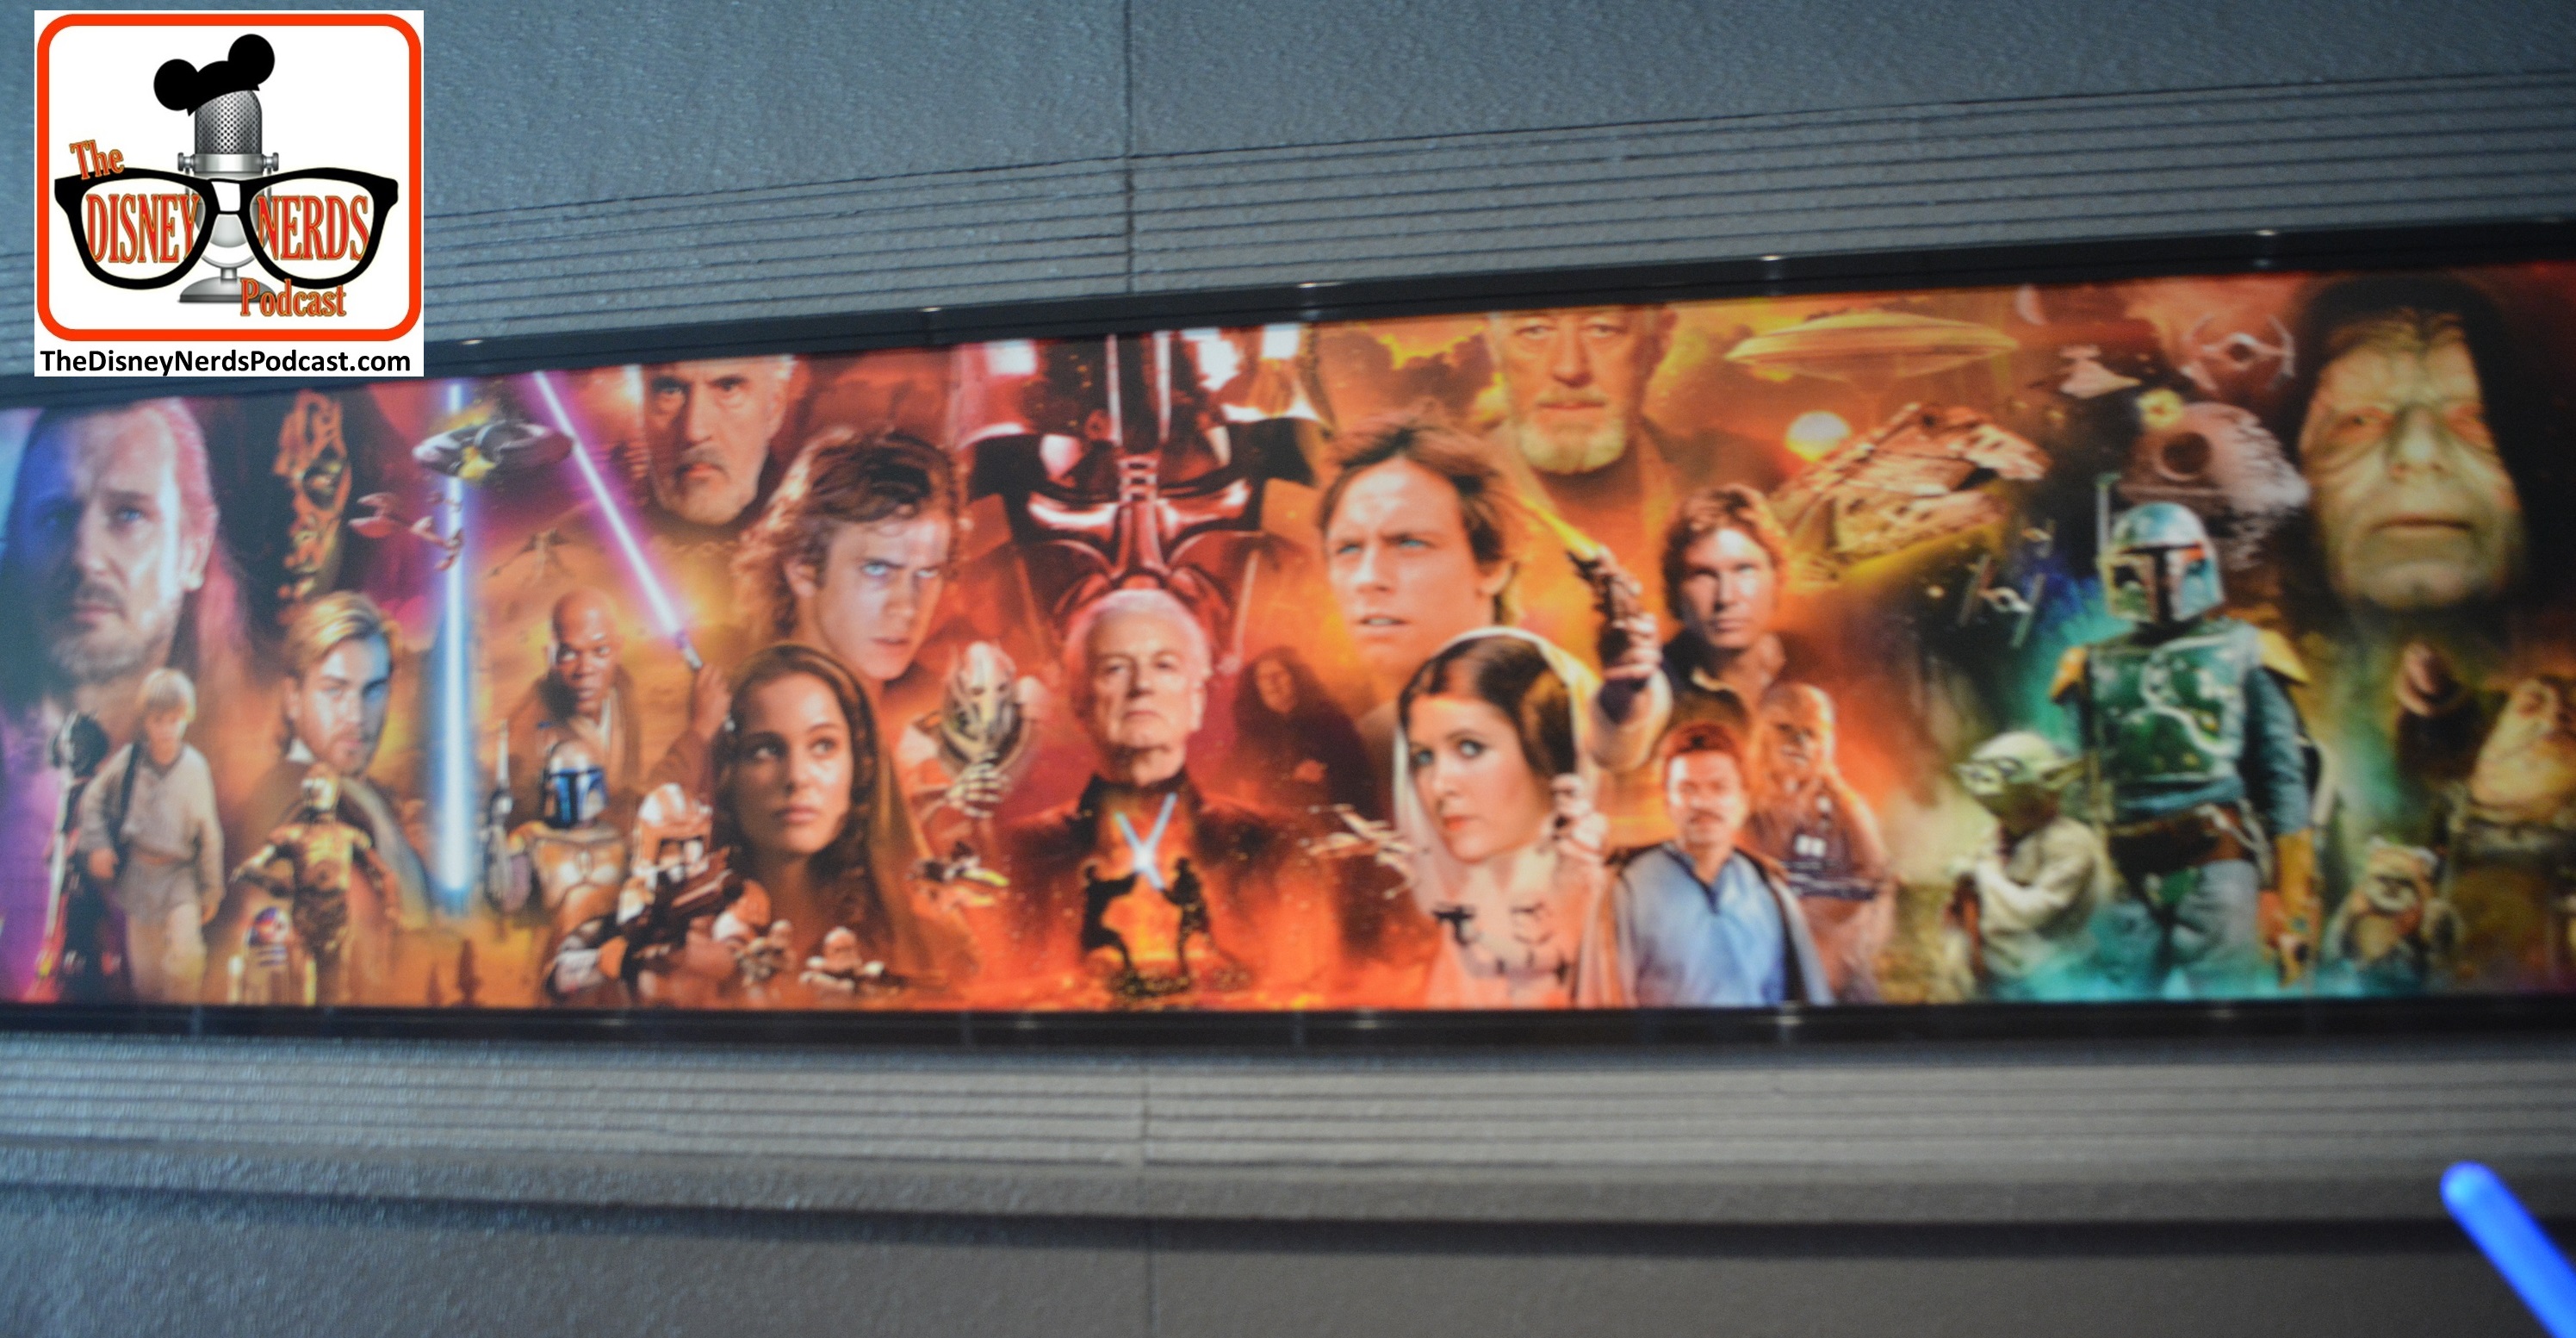 2015-12 - Hollywood Studios - huge Star Wars mural as you enter the queue area.